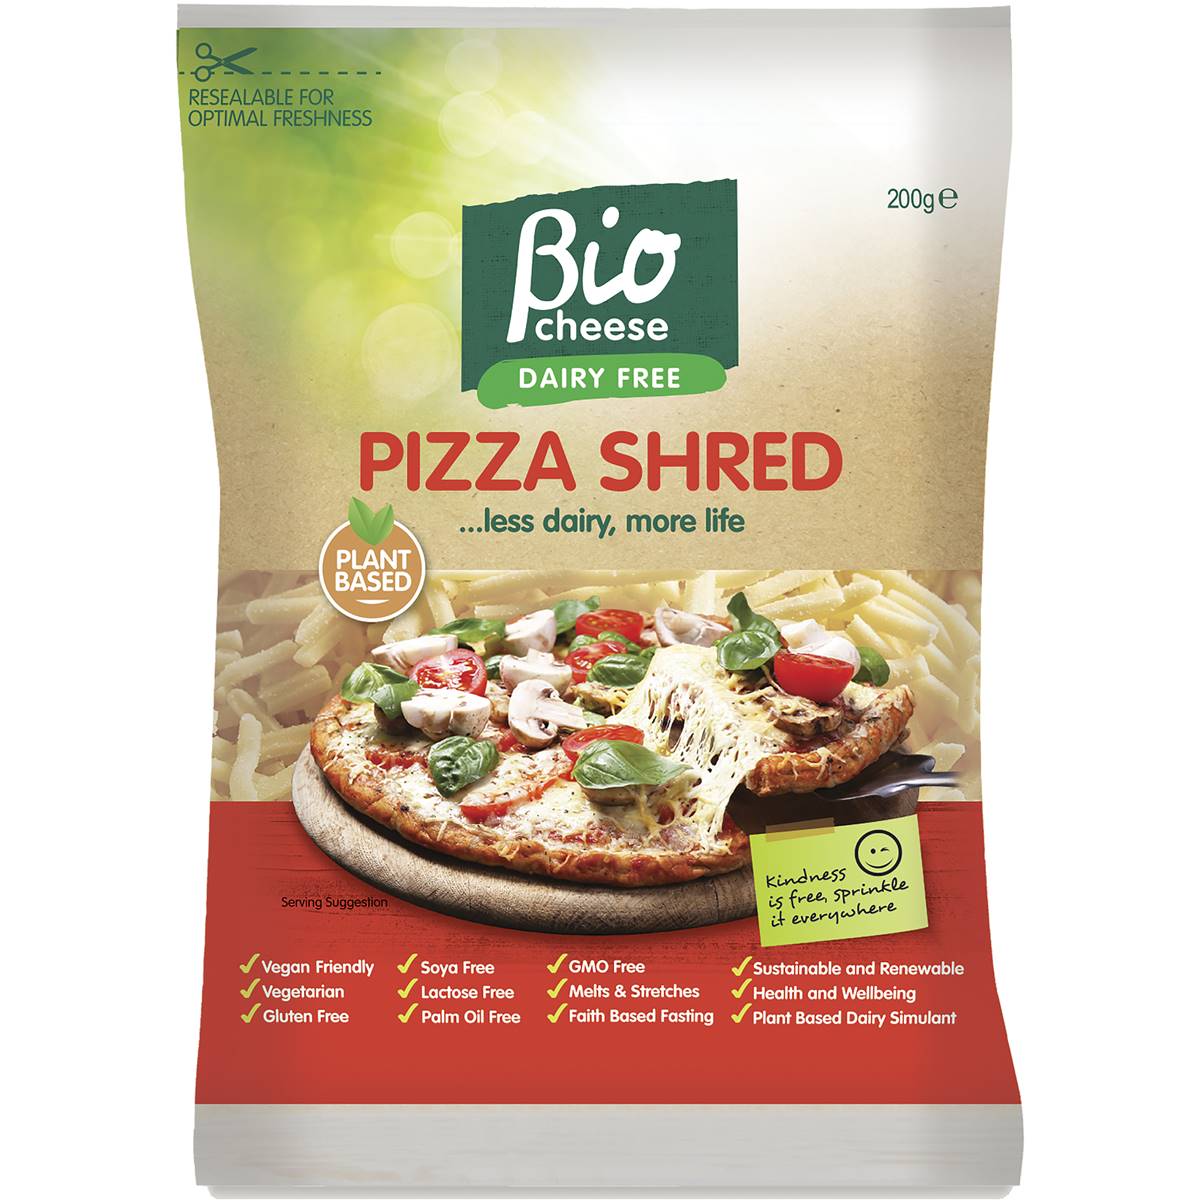 Calories in Bio Cheese Dairy Free Pizza Shred